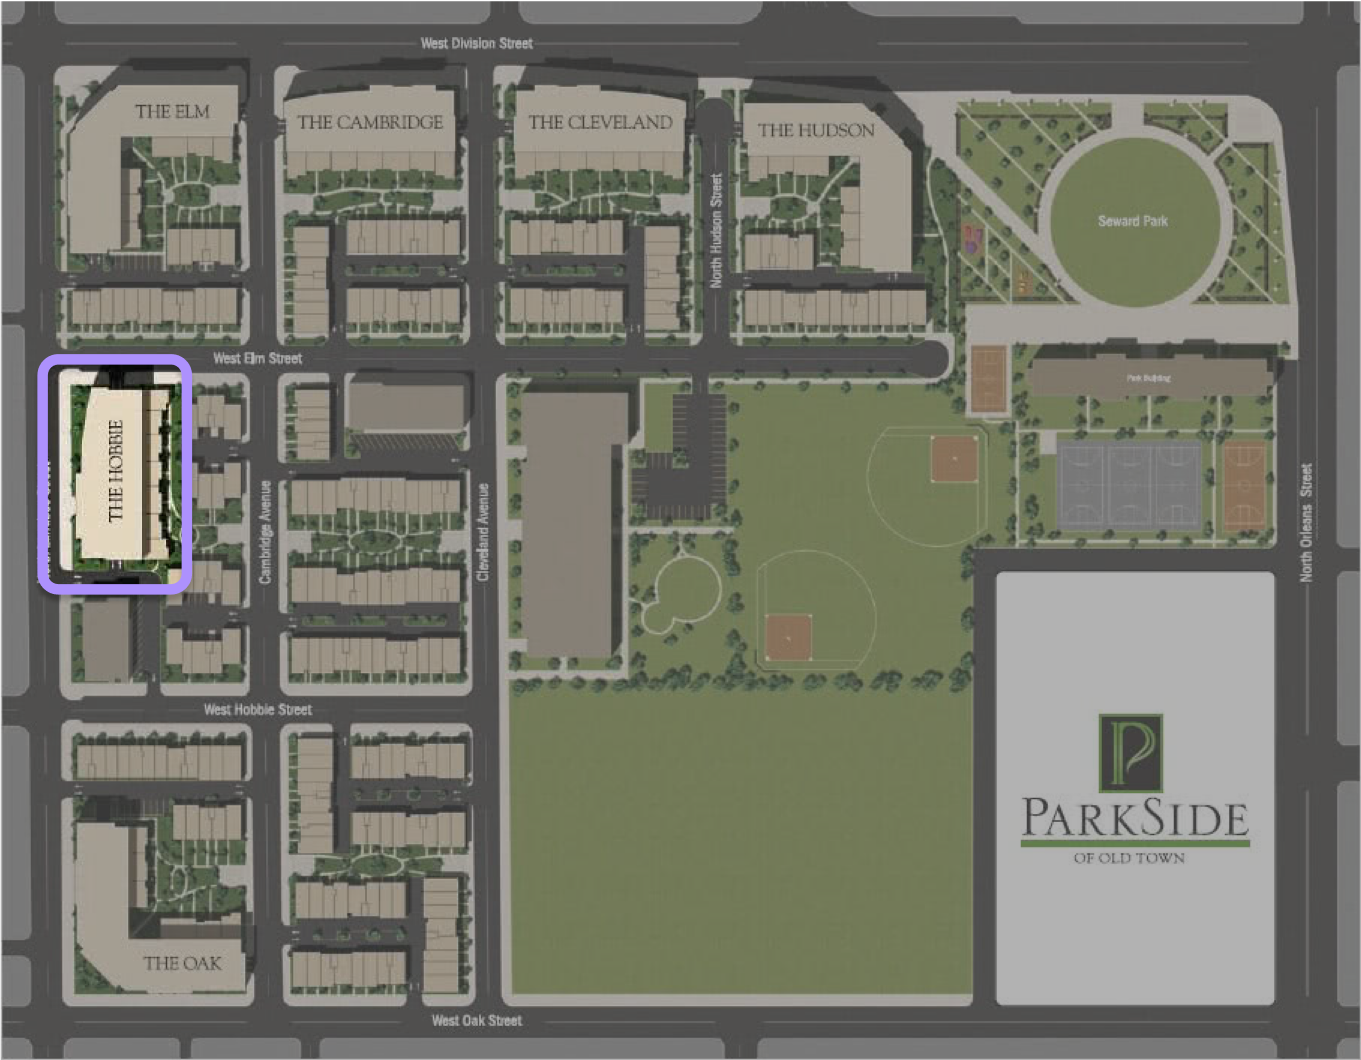 Overview of Parkside of Old Town, with a previous rendering of 551 W Elm Street highlighted